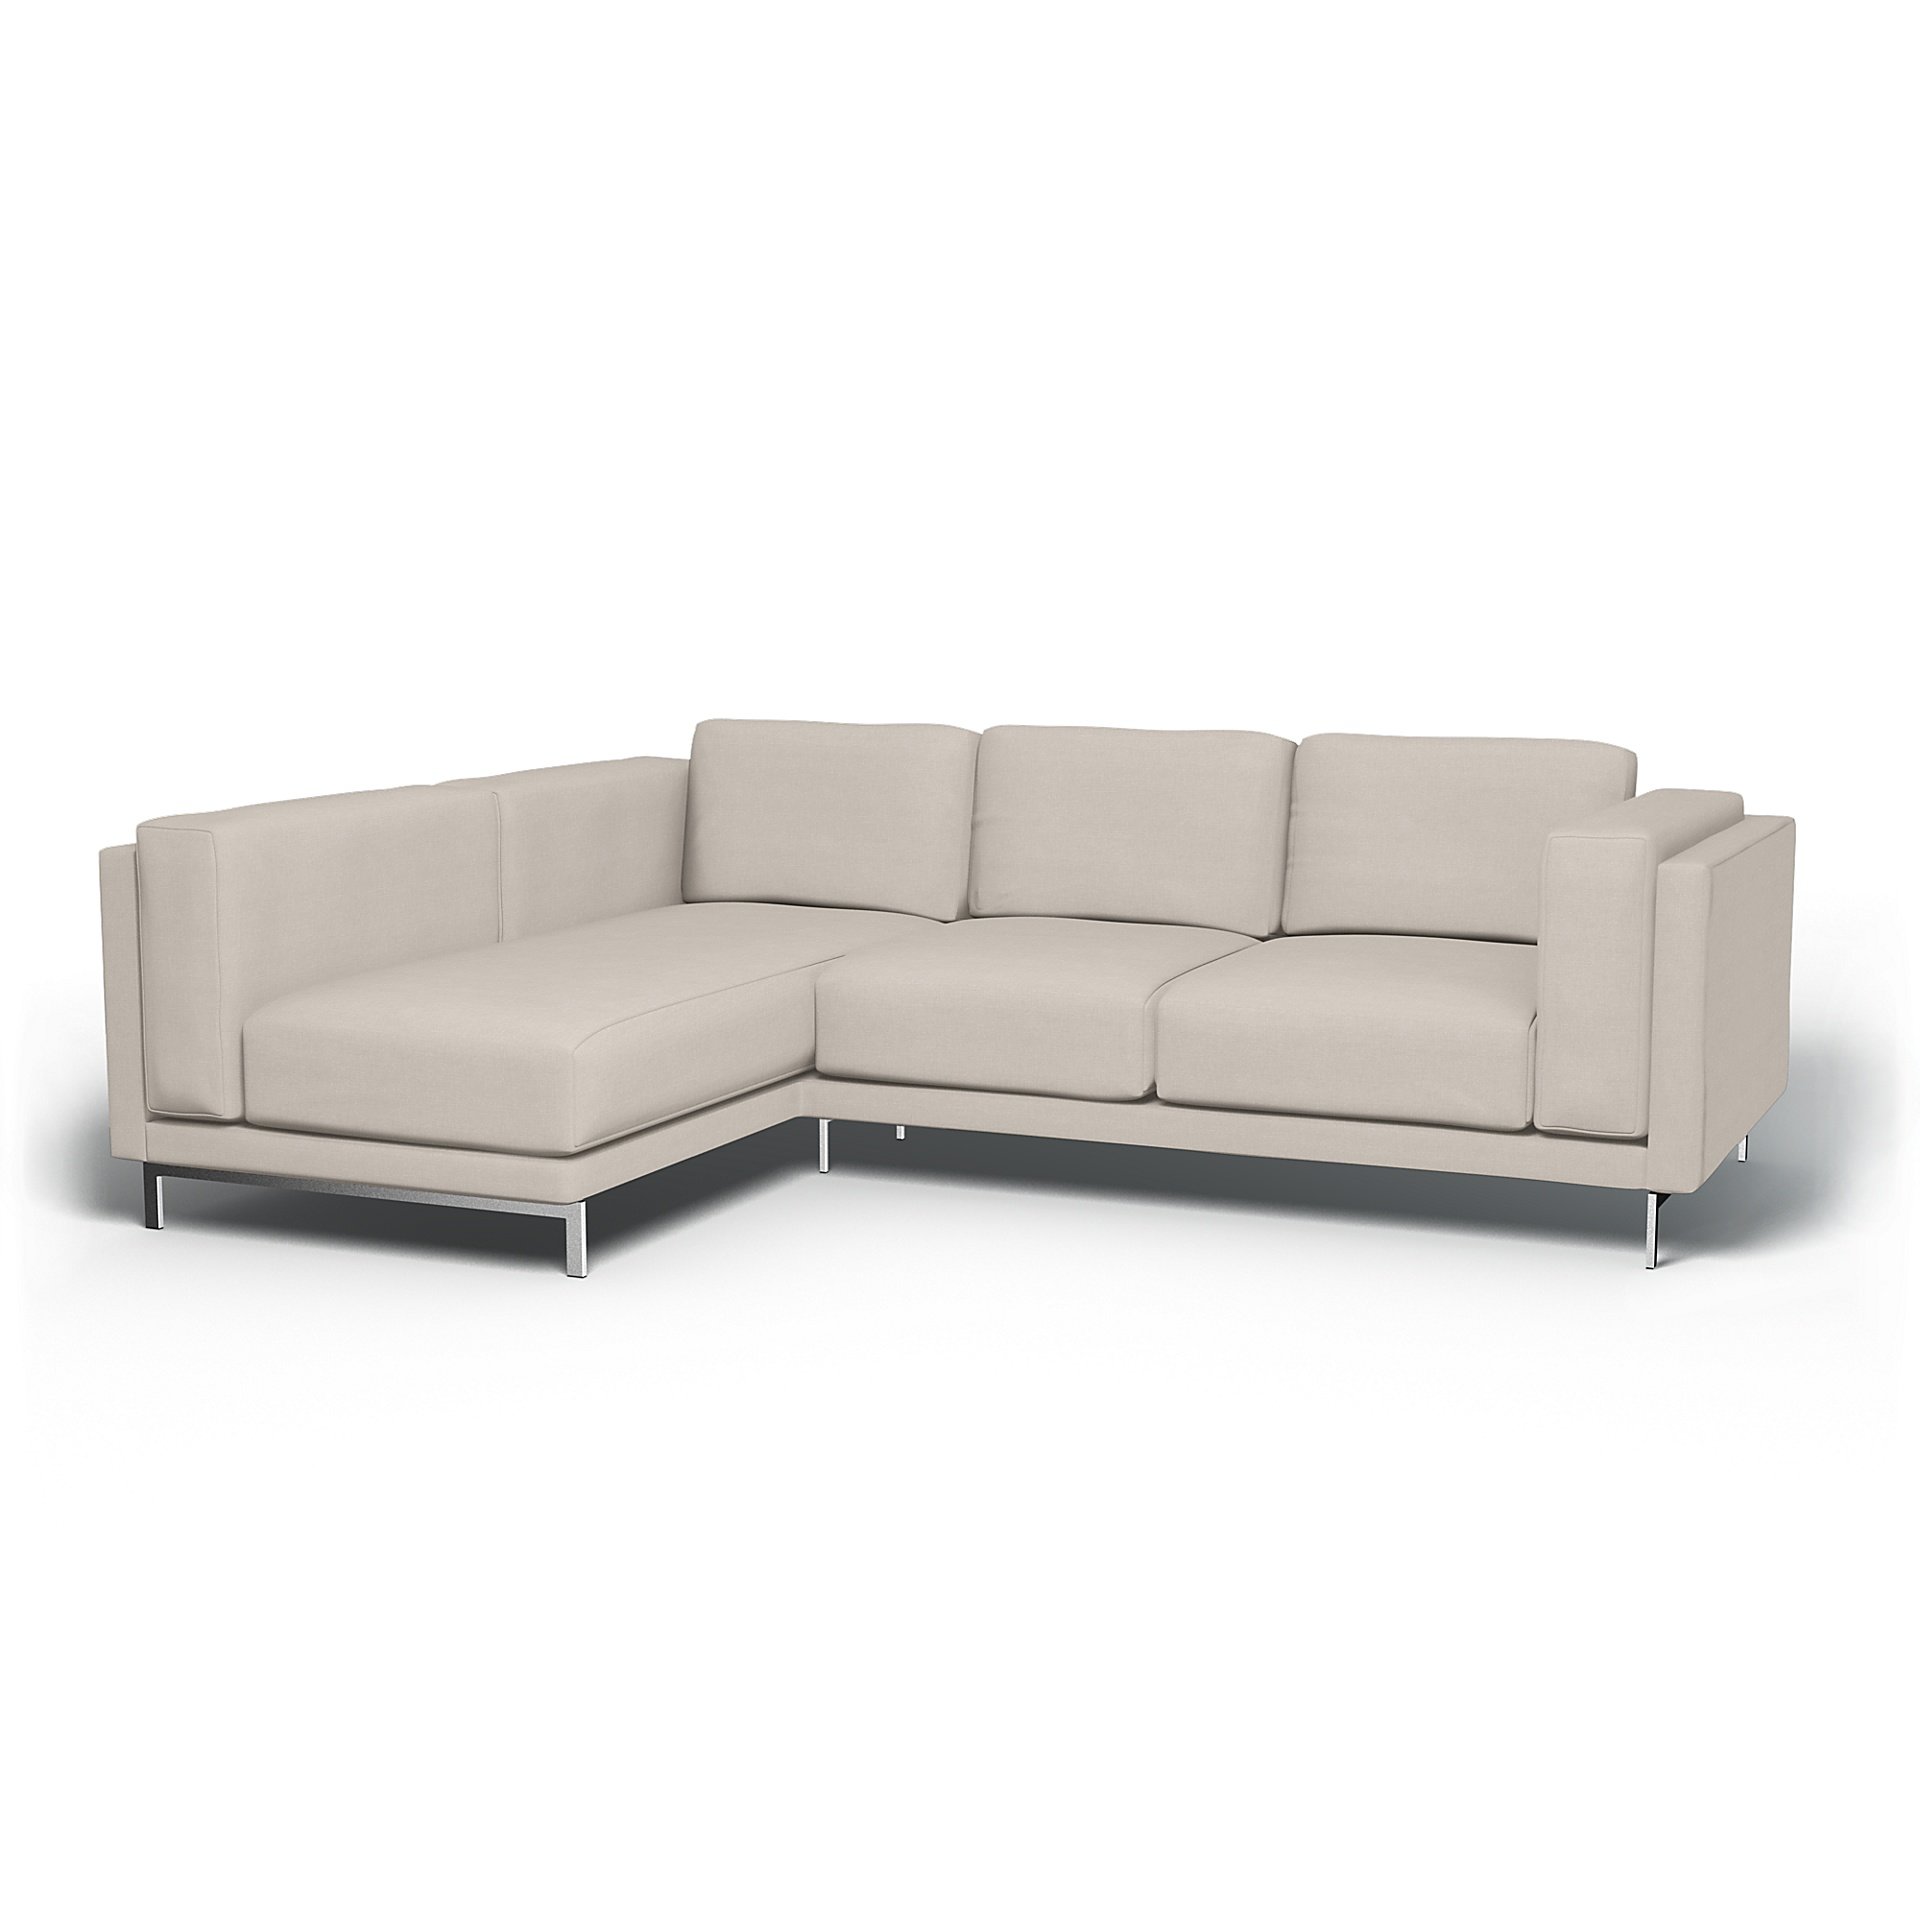 IKEA - Nockeby 3 Seater Sofa with Left Chaise Cover, Chalk, Linen - Bemz